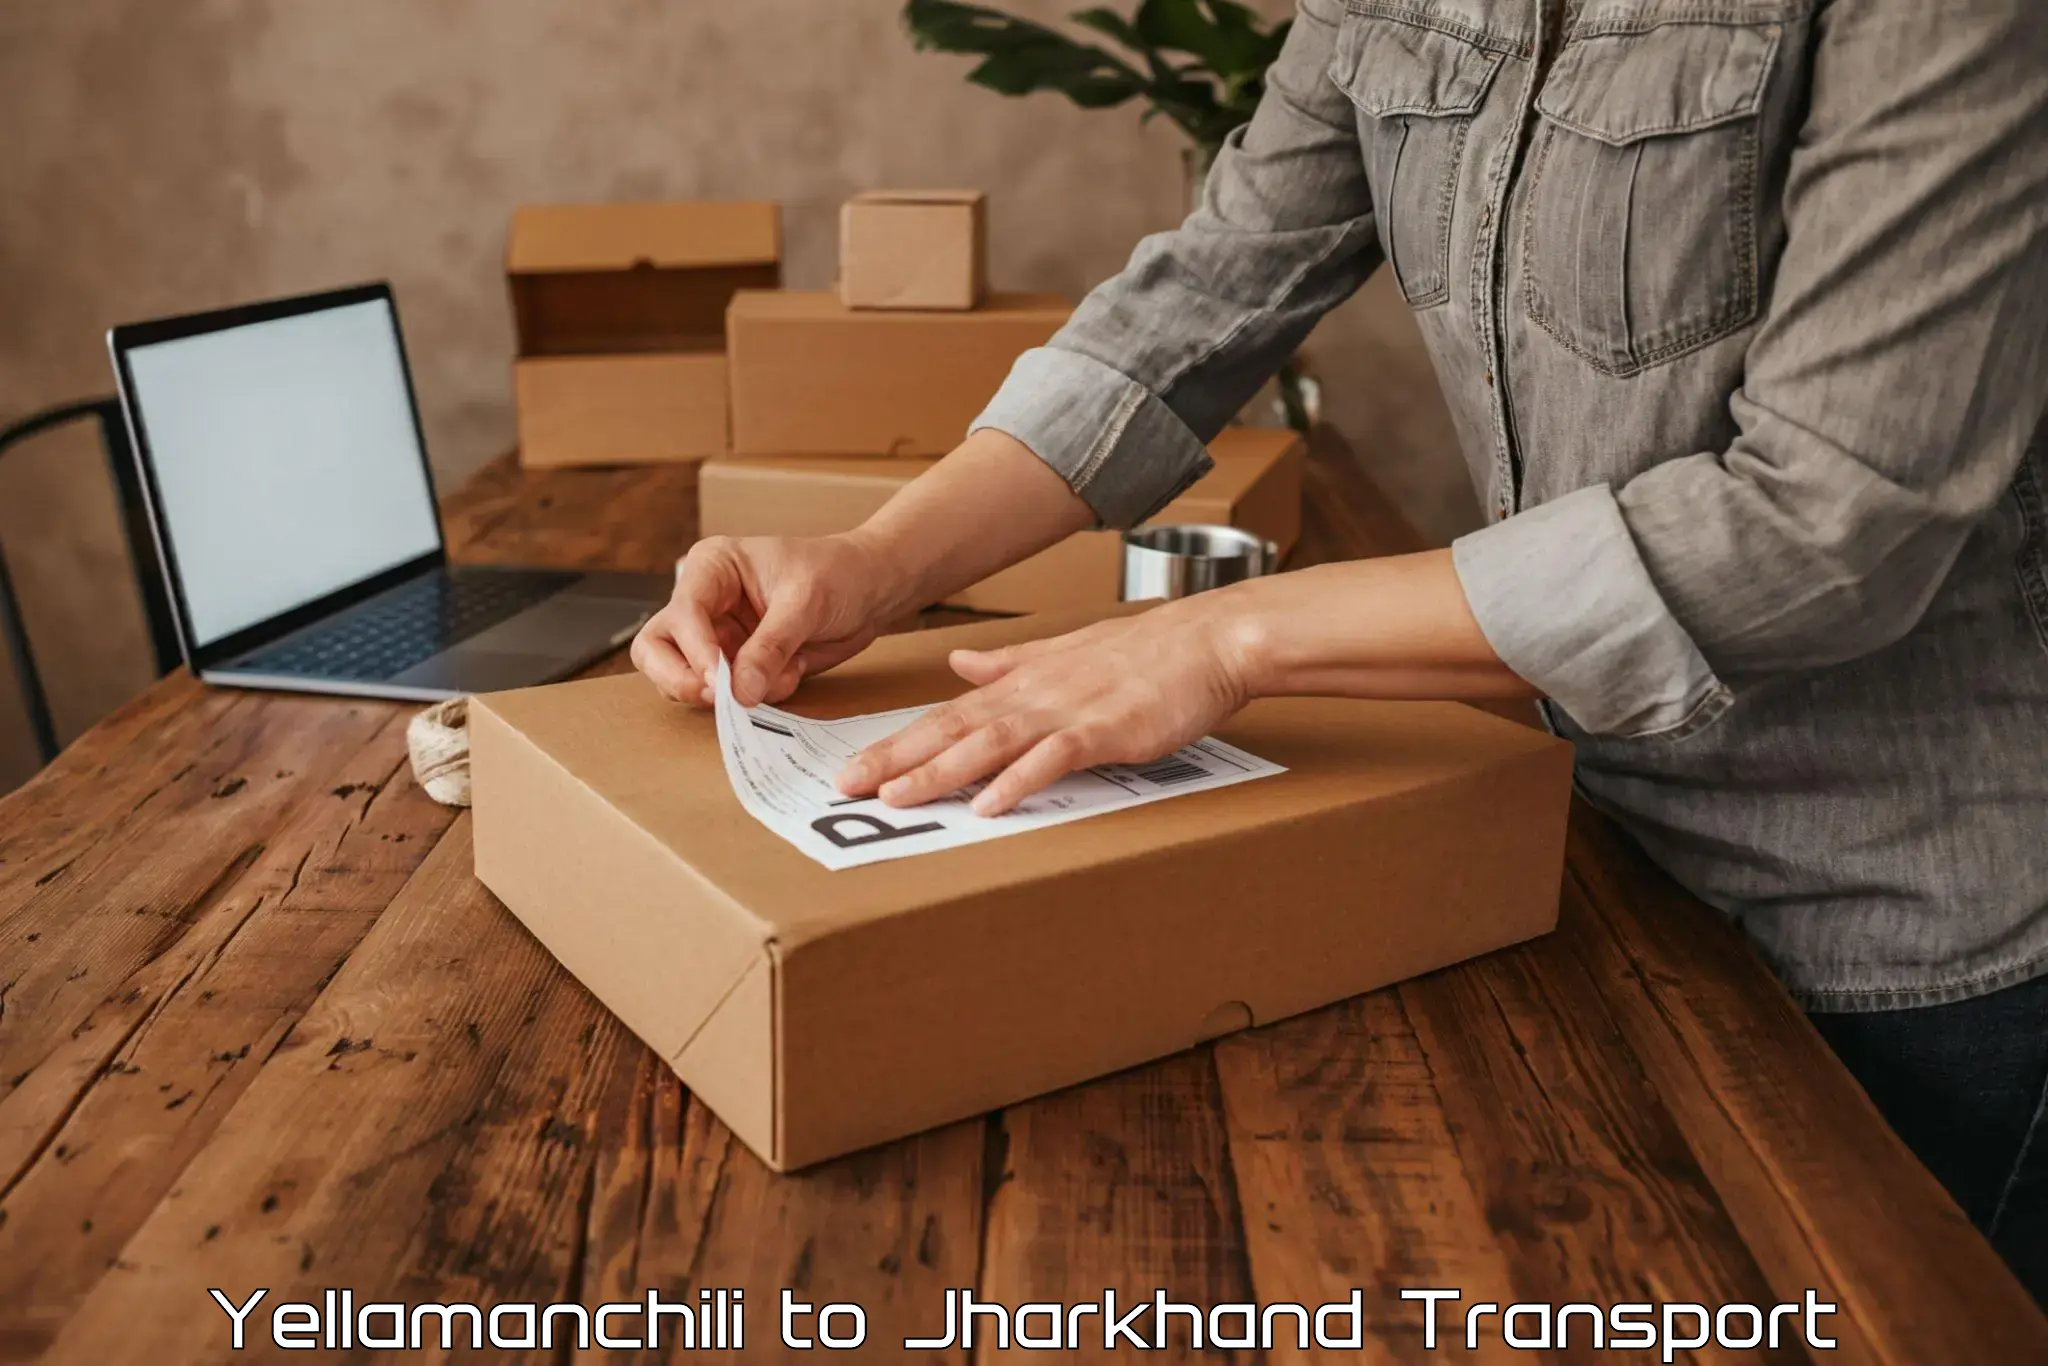 Part load transport service in India Yellamanchili to Dhanbad